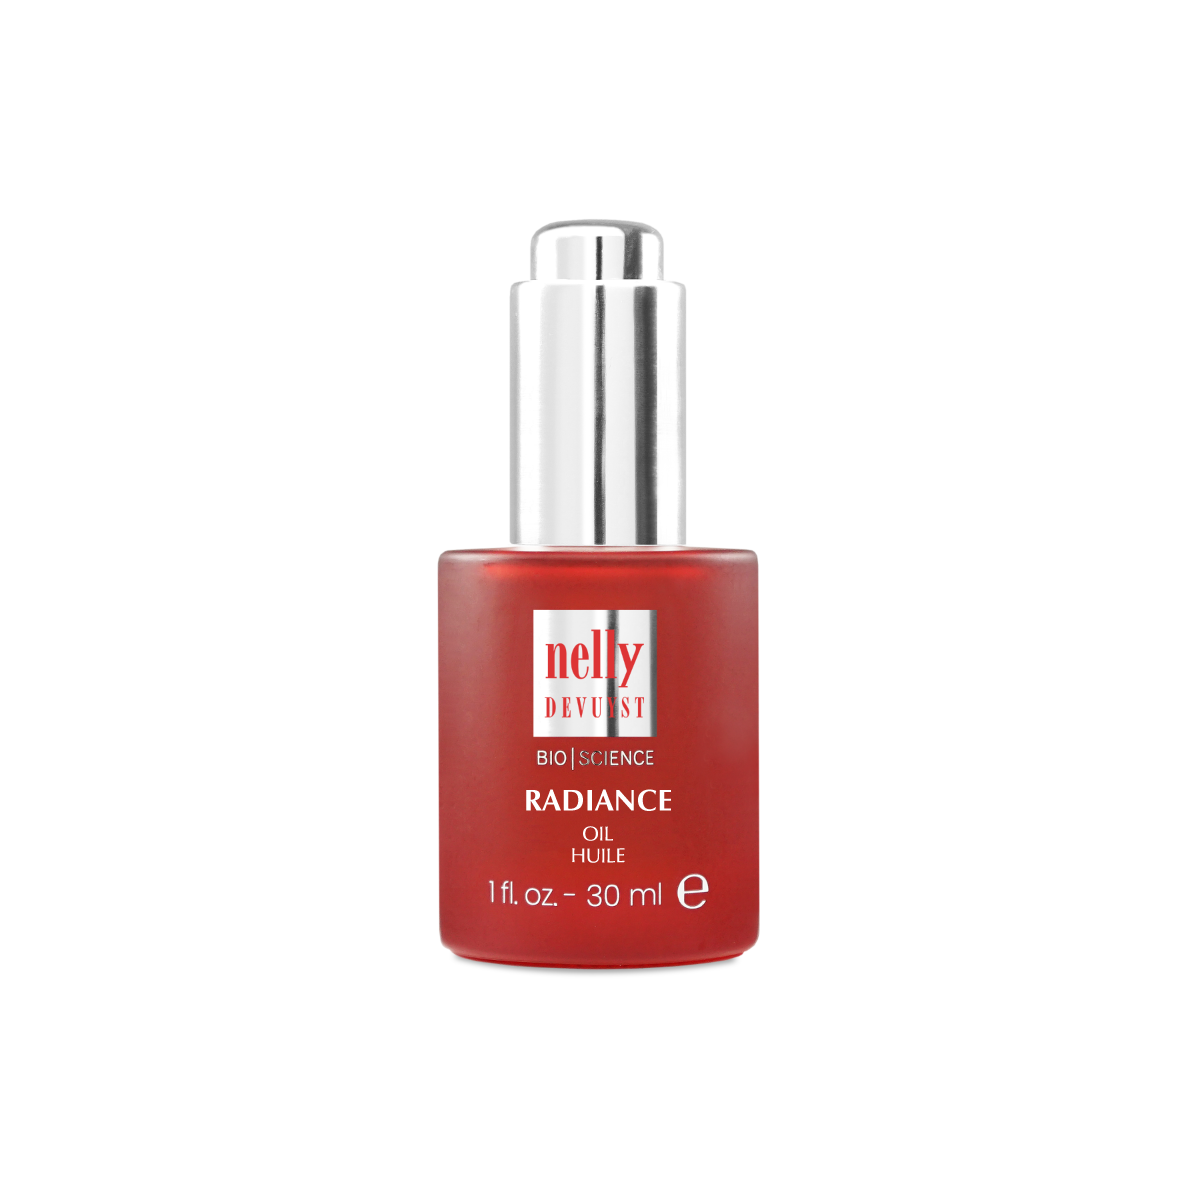 Nelly devuyst Lifting Peptides Serum 30ml